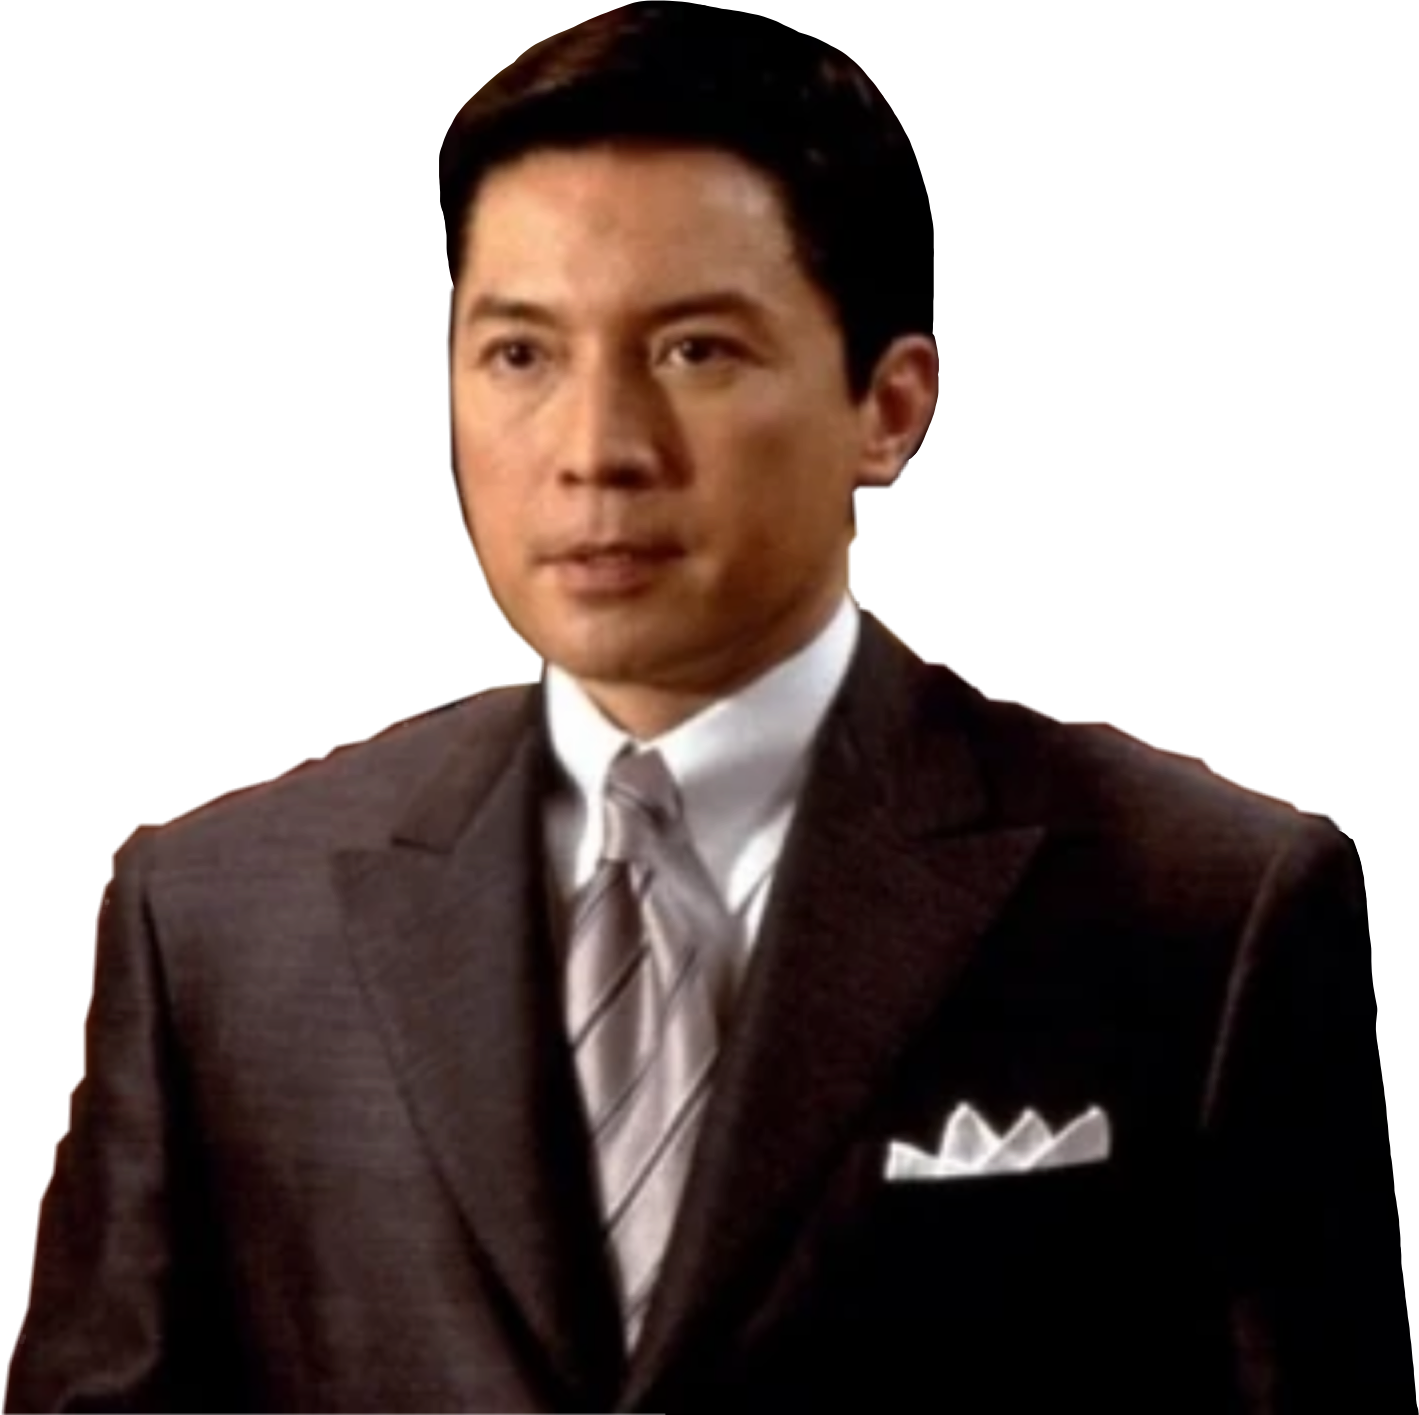 Rush Hour 2 - Ricky Tan by TurkishAutismGaming on DeviantArt